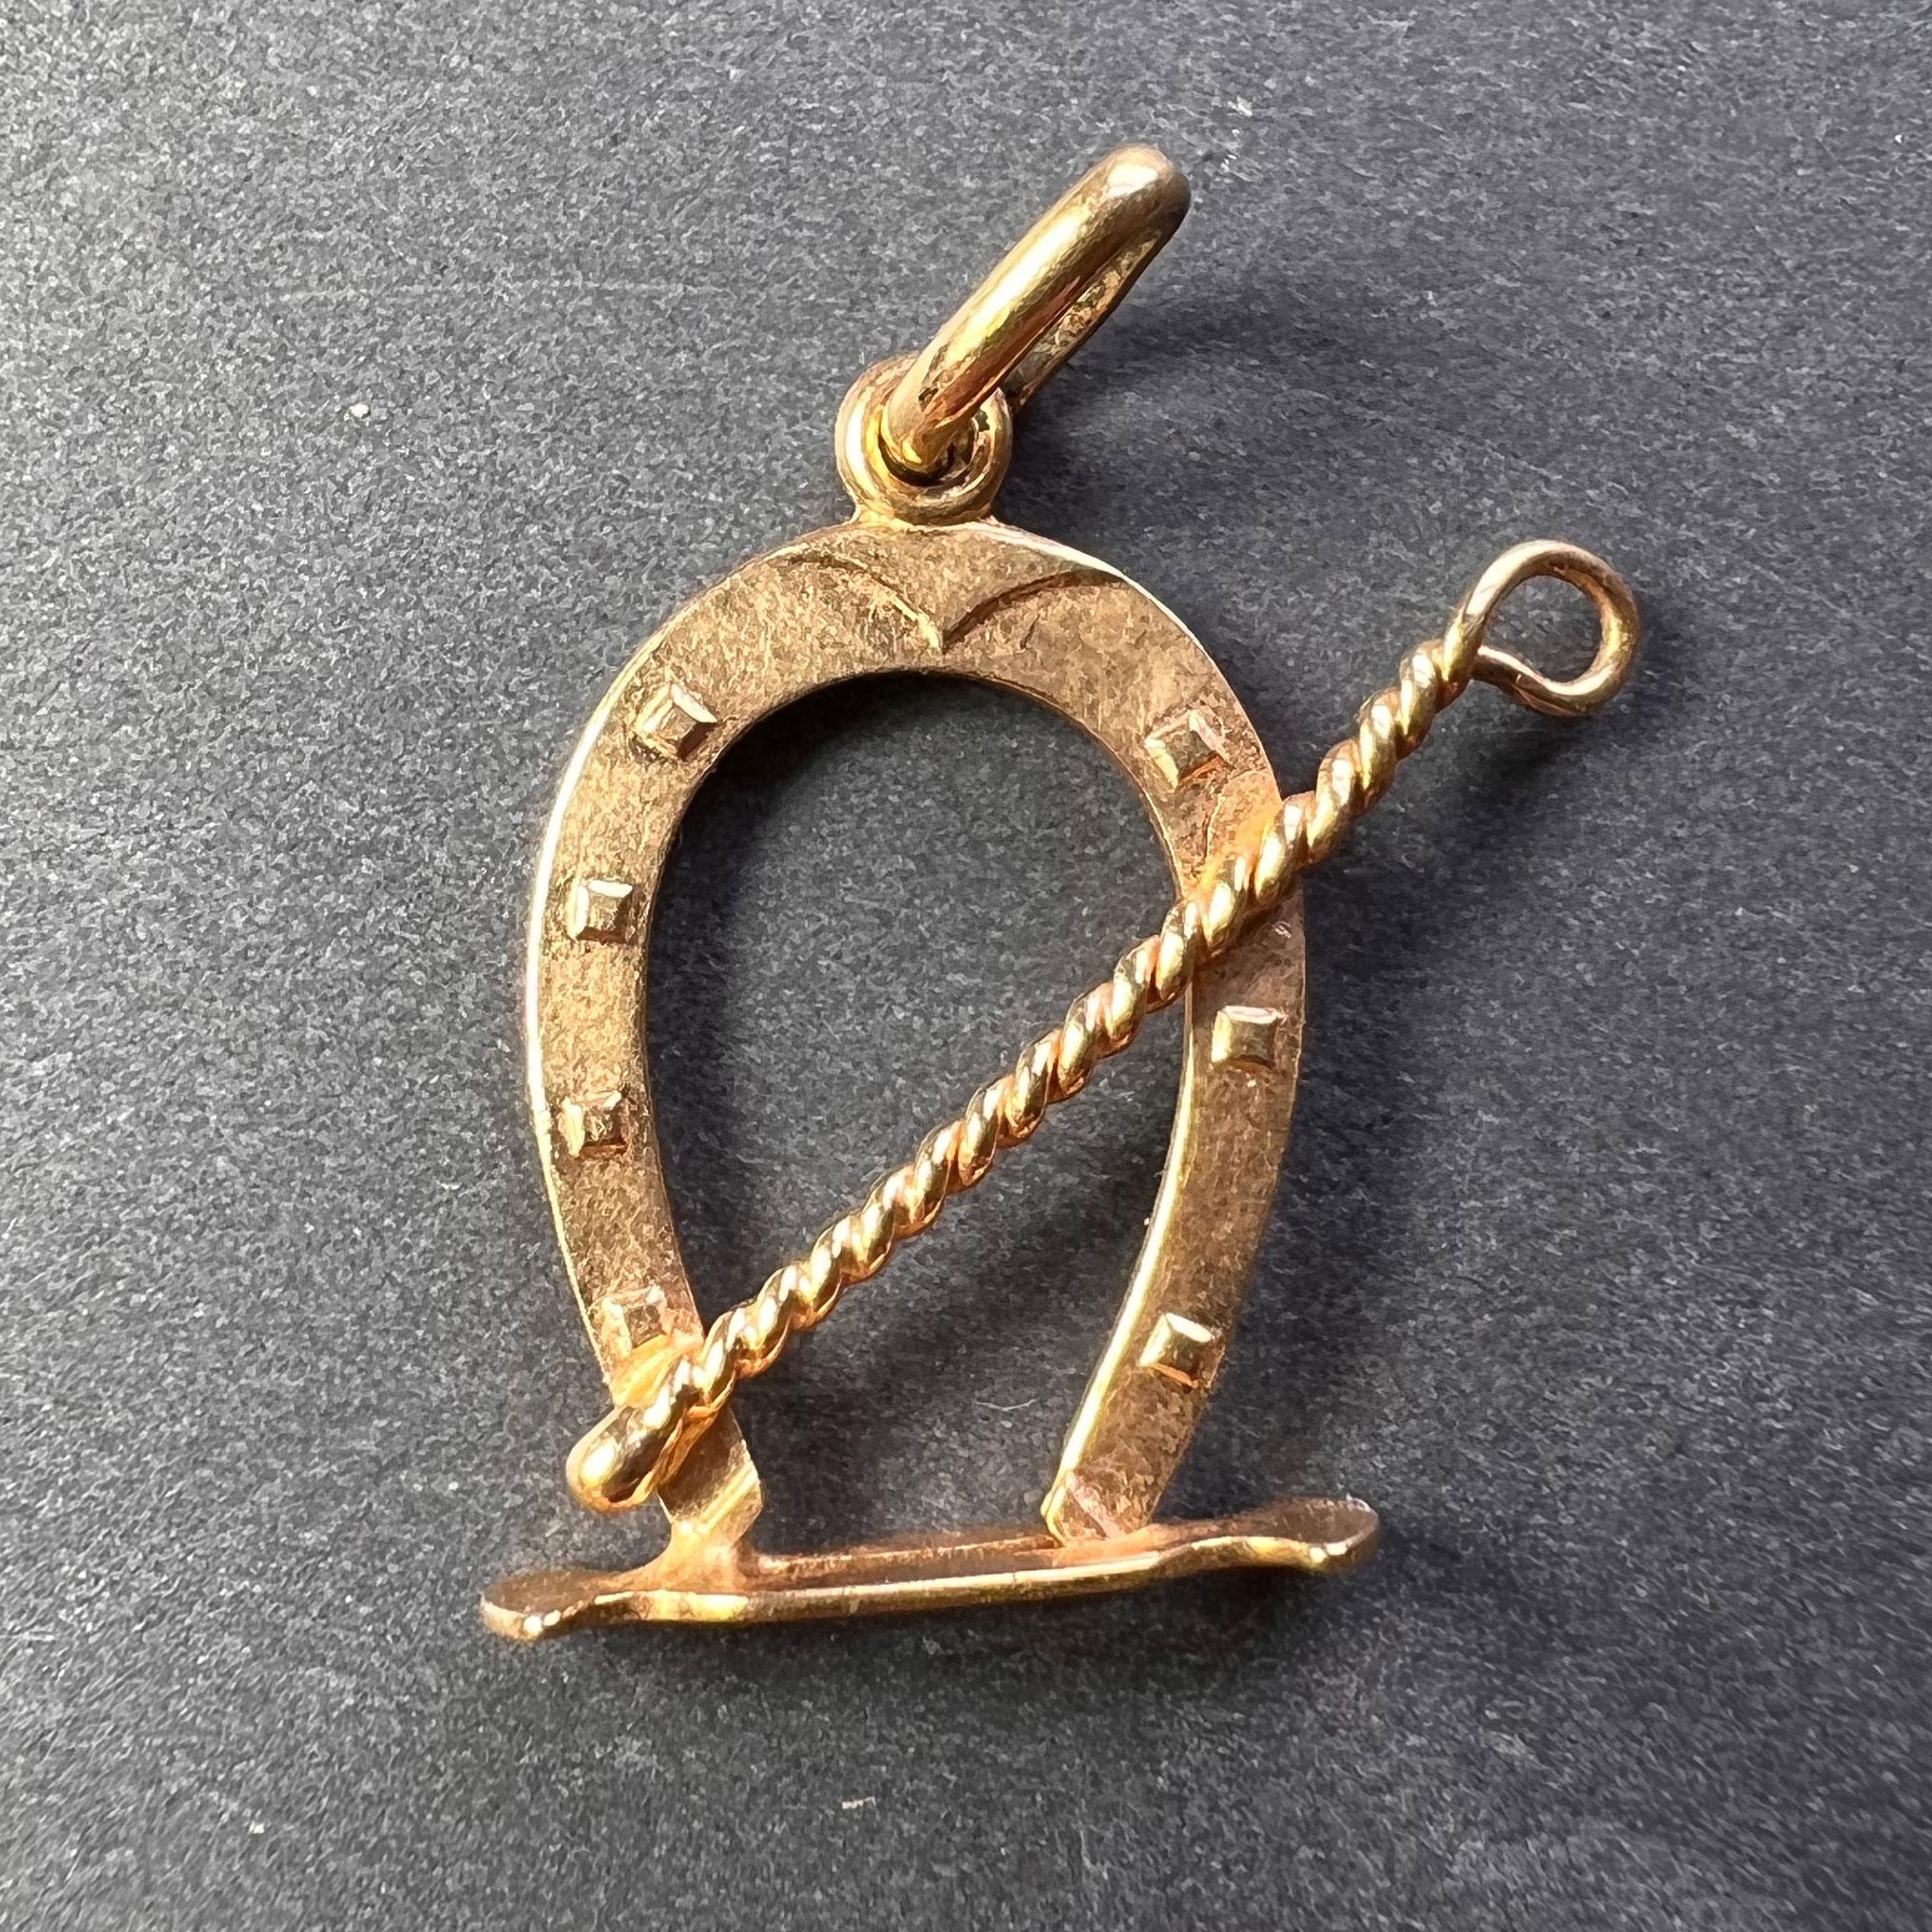 An 18 karat (18K) yellow gold charm pendant designed as a lucky horseshoe with a whip. Stamped 750 for 18 karat gold and 1AR for Italian manufacture to the bail.
 
Dimensions: 2 x 1.8 x 0.35 cm (not including jump ring)
Weight: 1.31 grams
